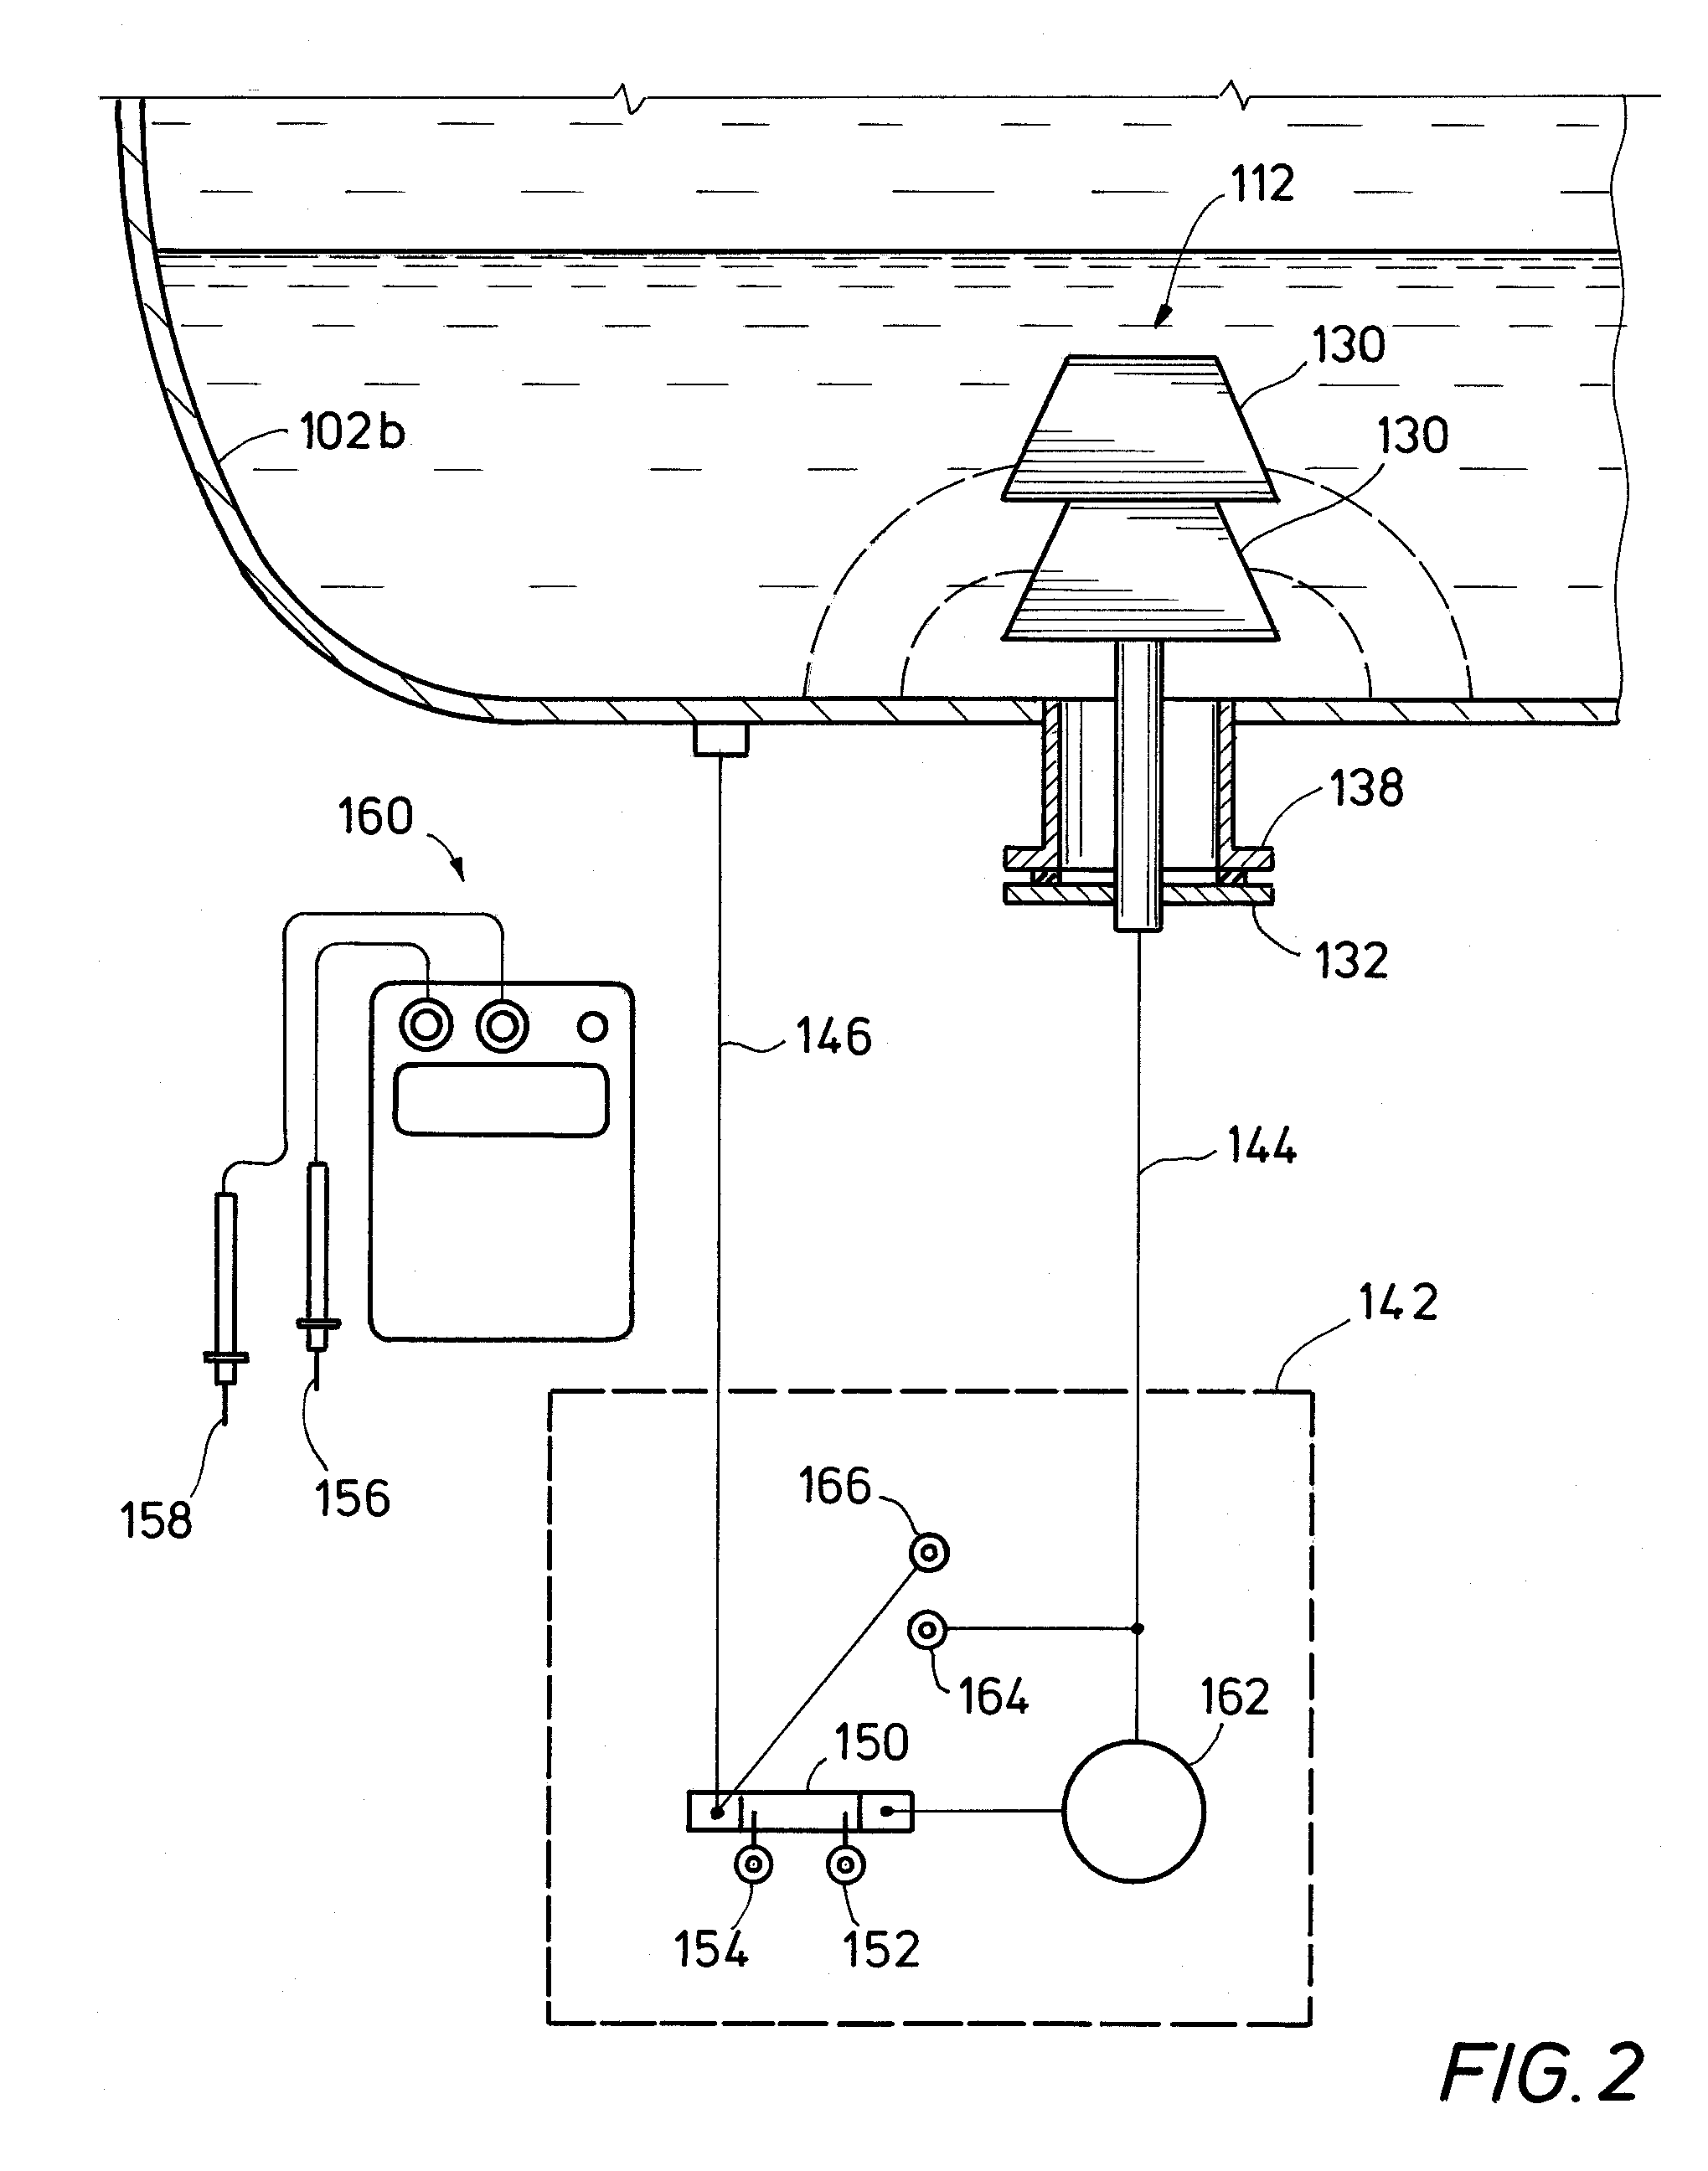 Cathodic protection automated current and potential measuring device for anodes protecting vessel internals